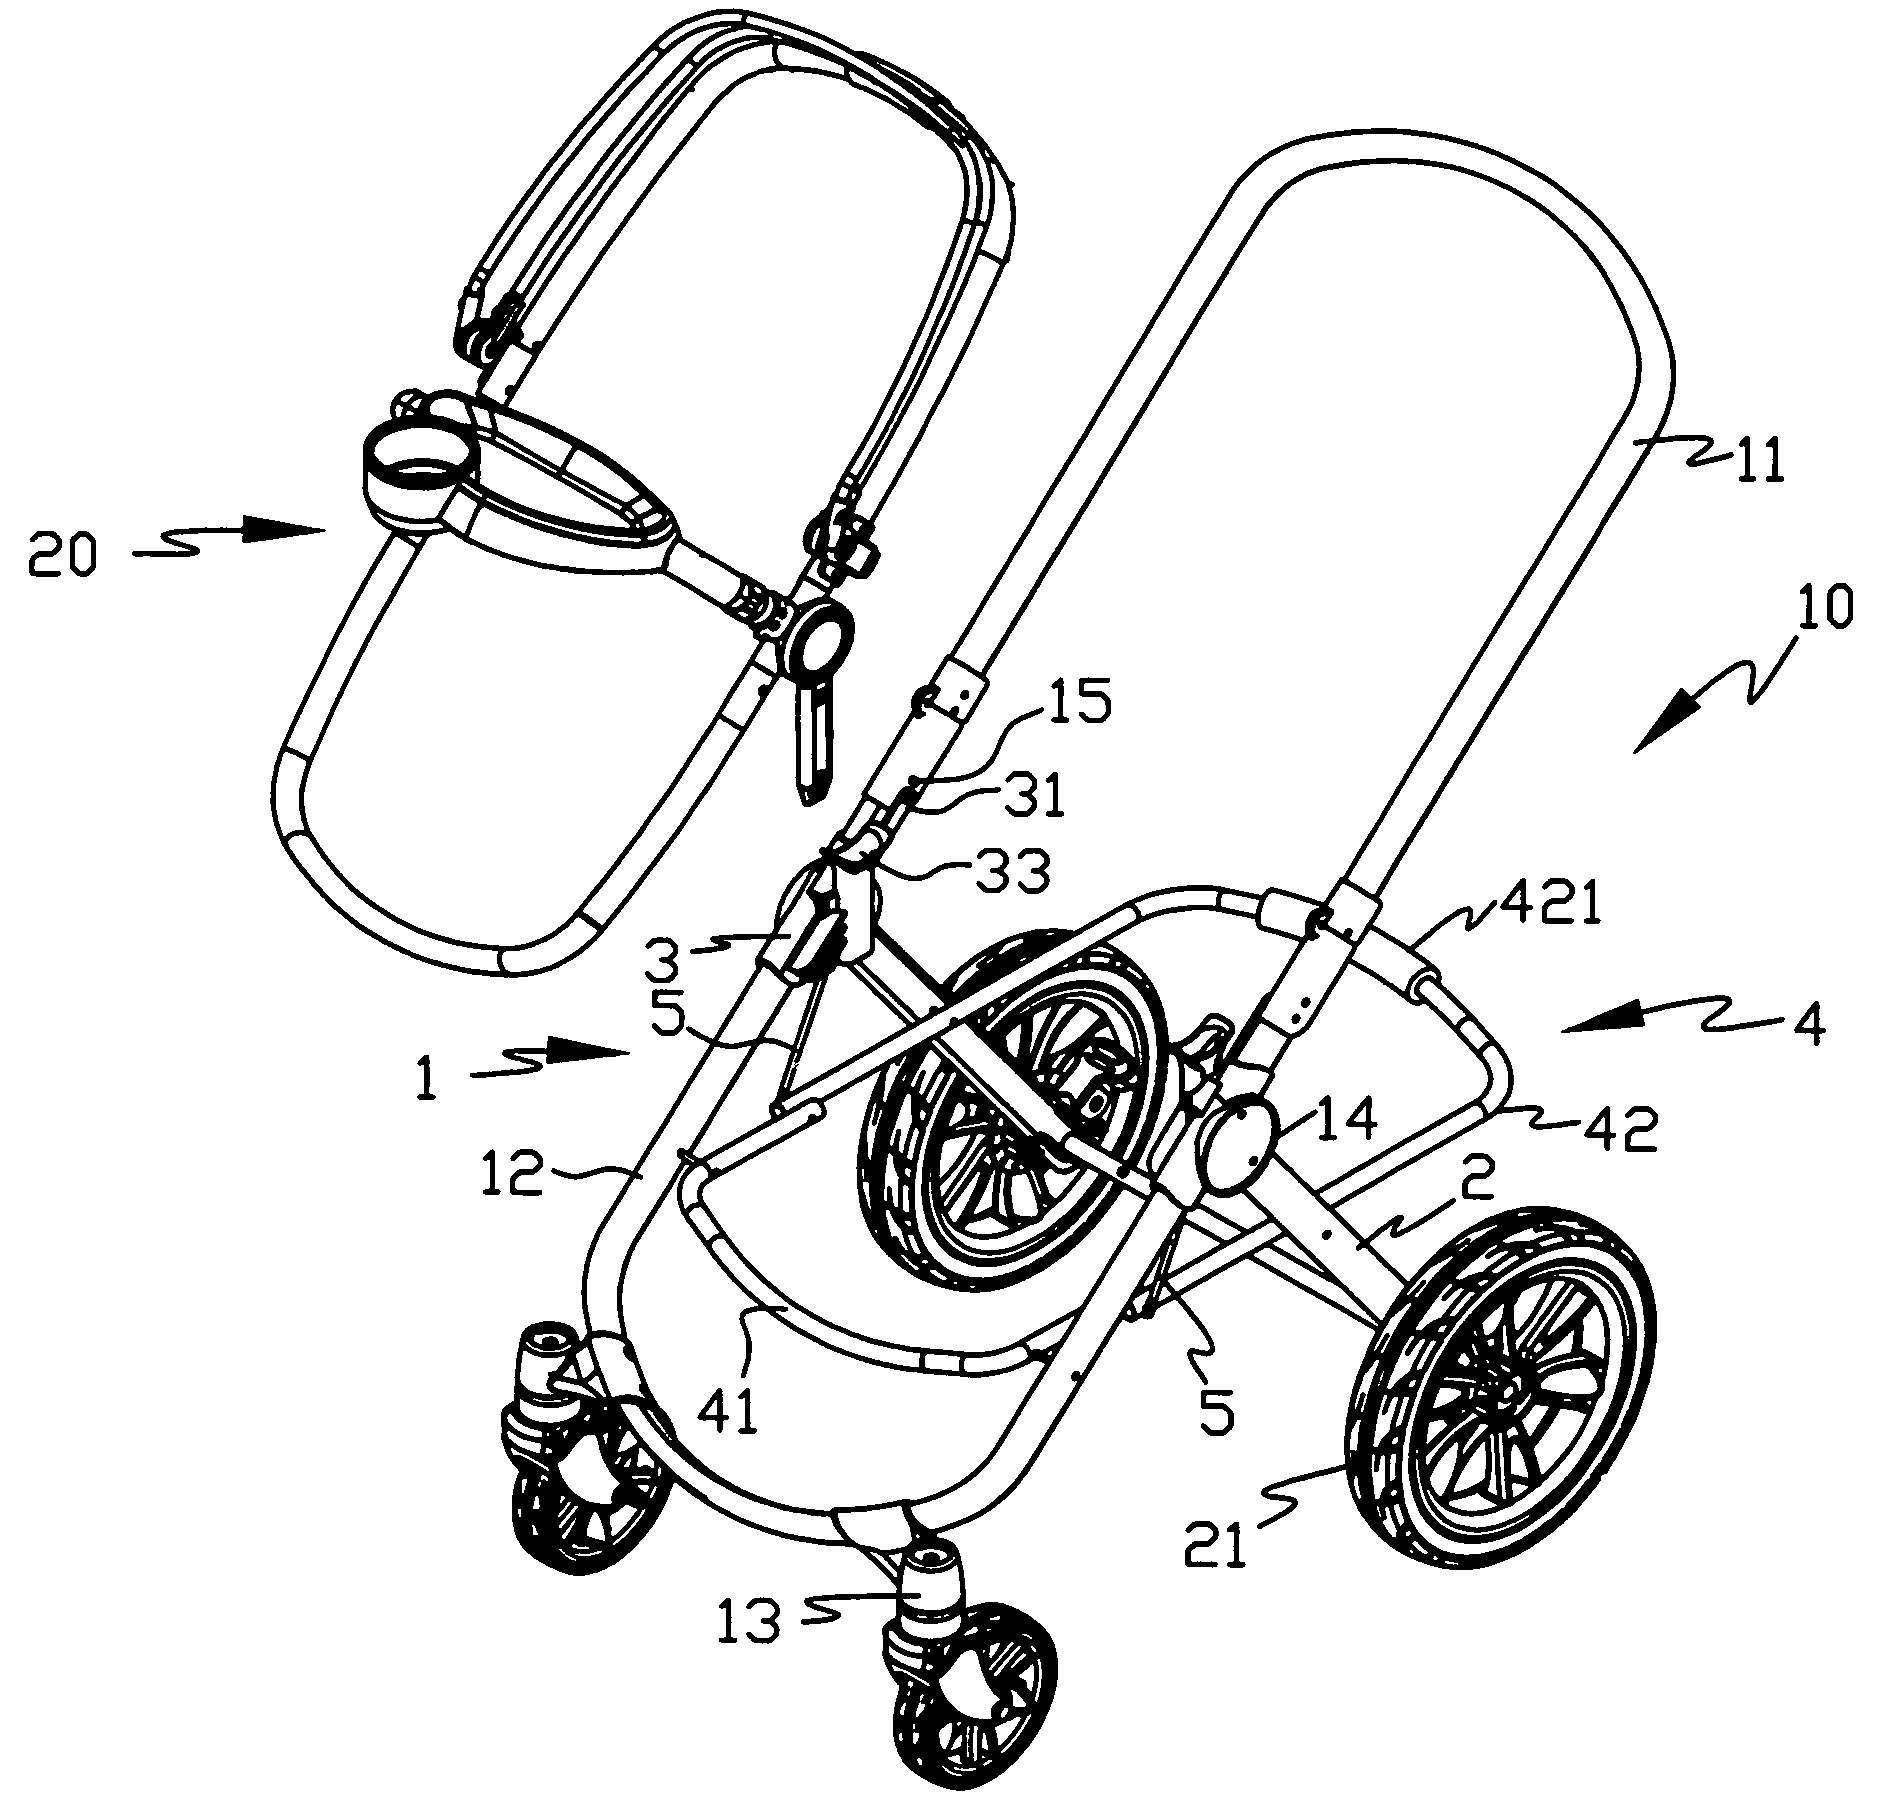 Collapsible stroller frame